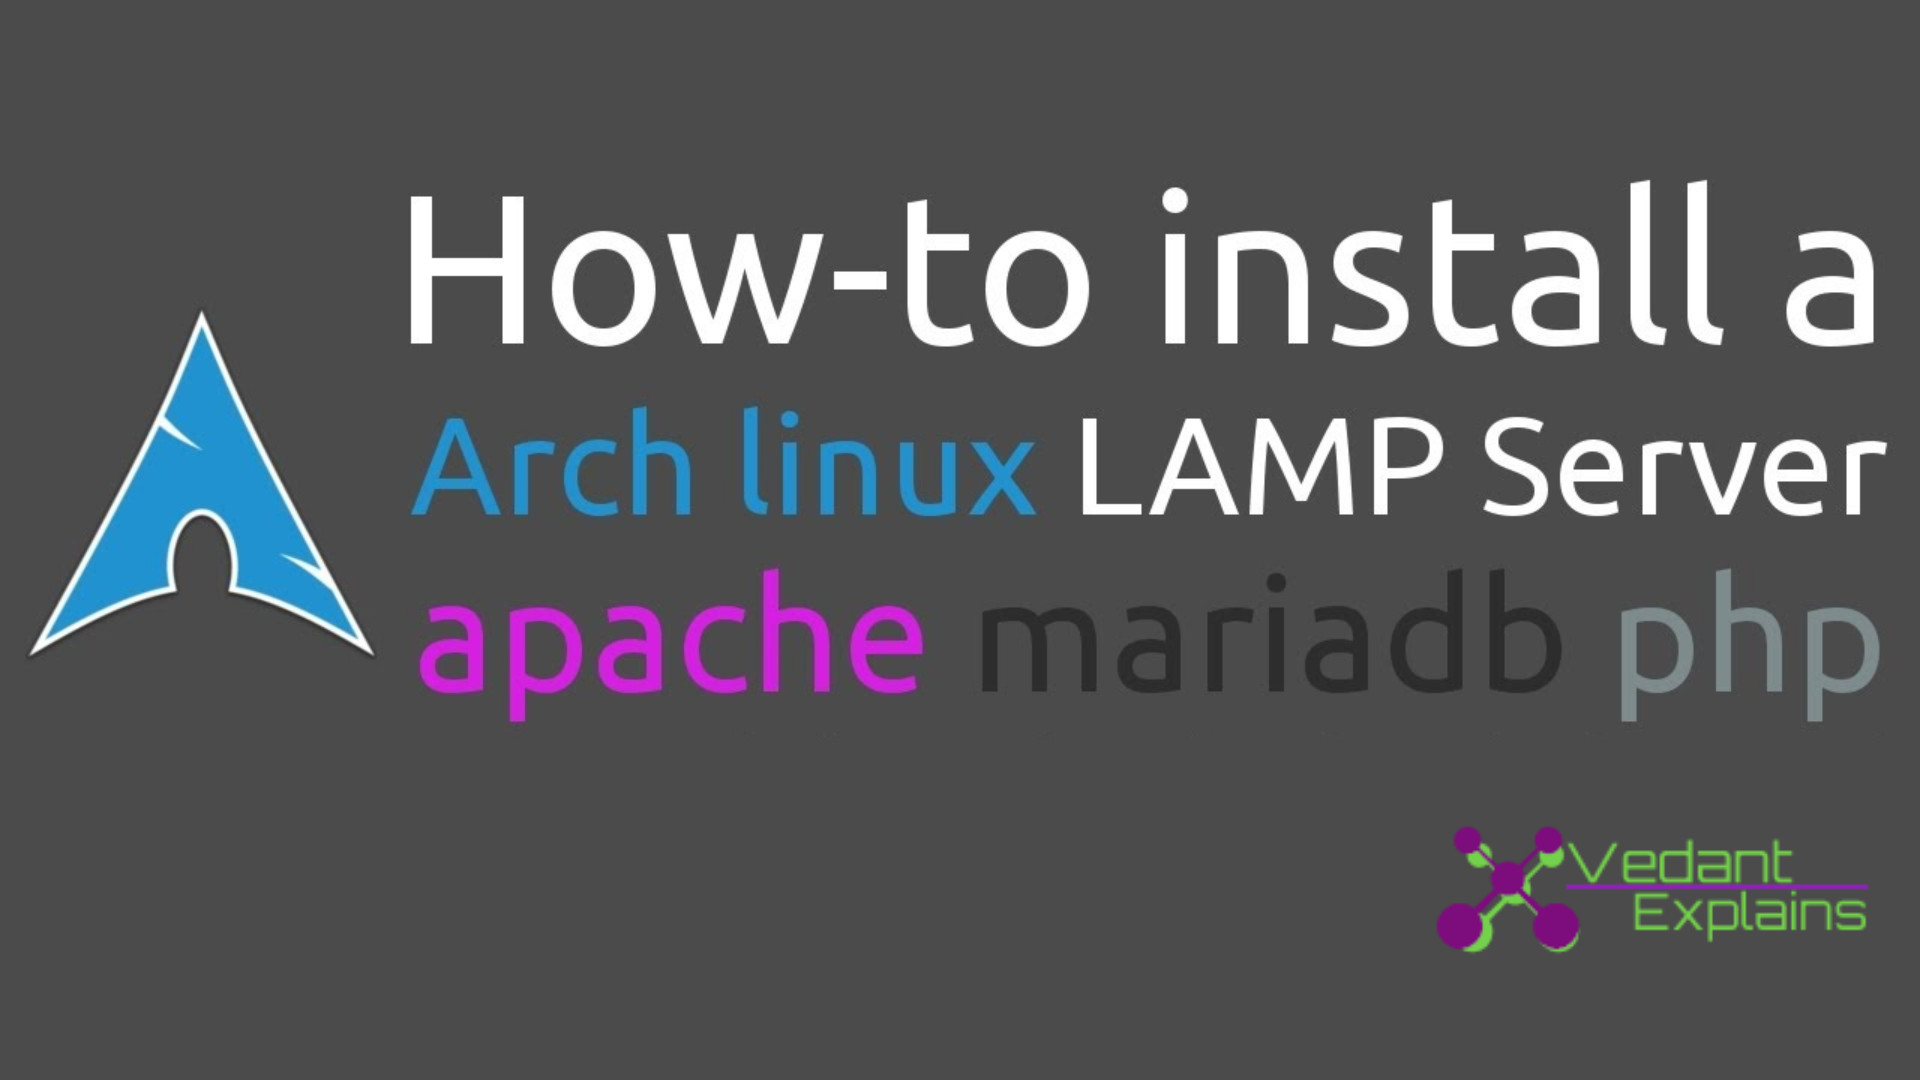 Install Apache, MariaDB, PHP (LAMP) stack on Arch Linux